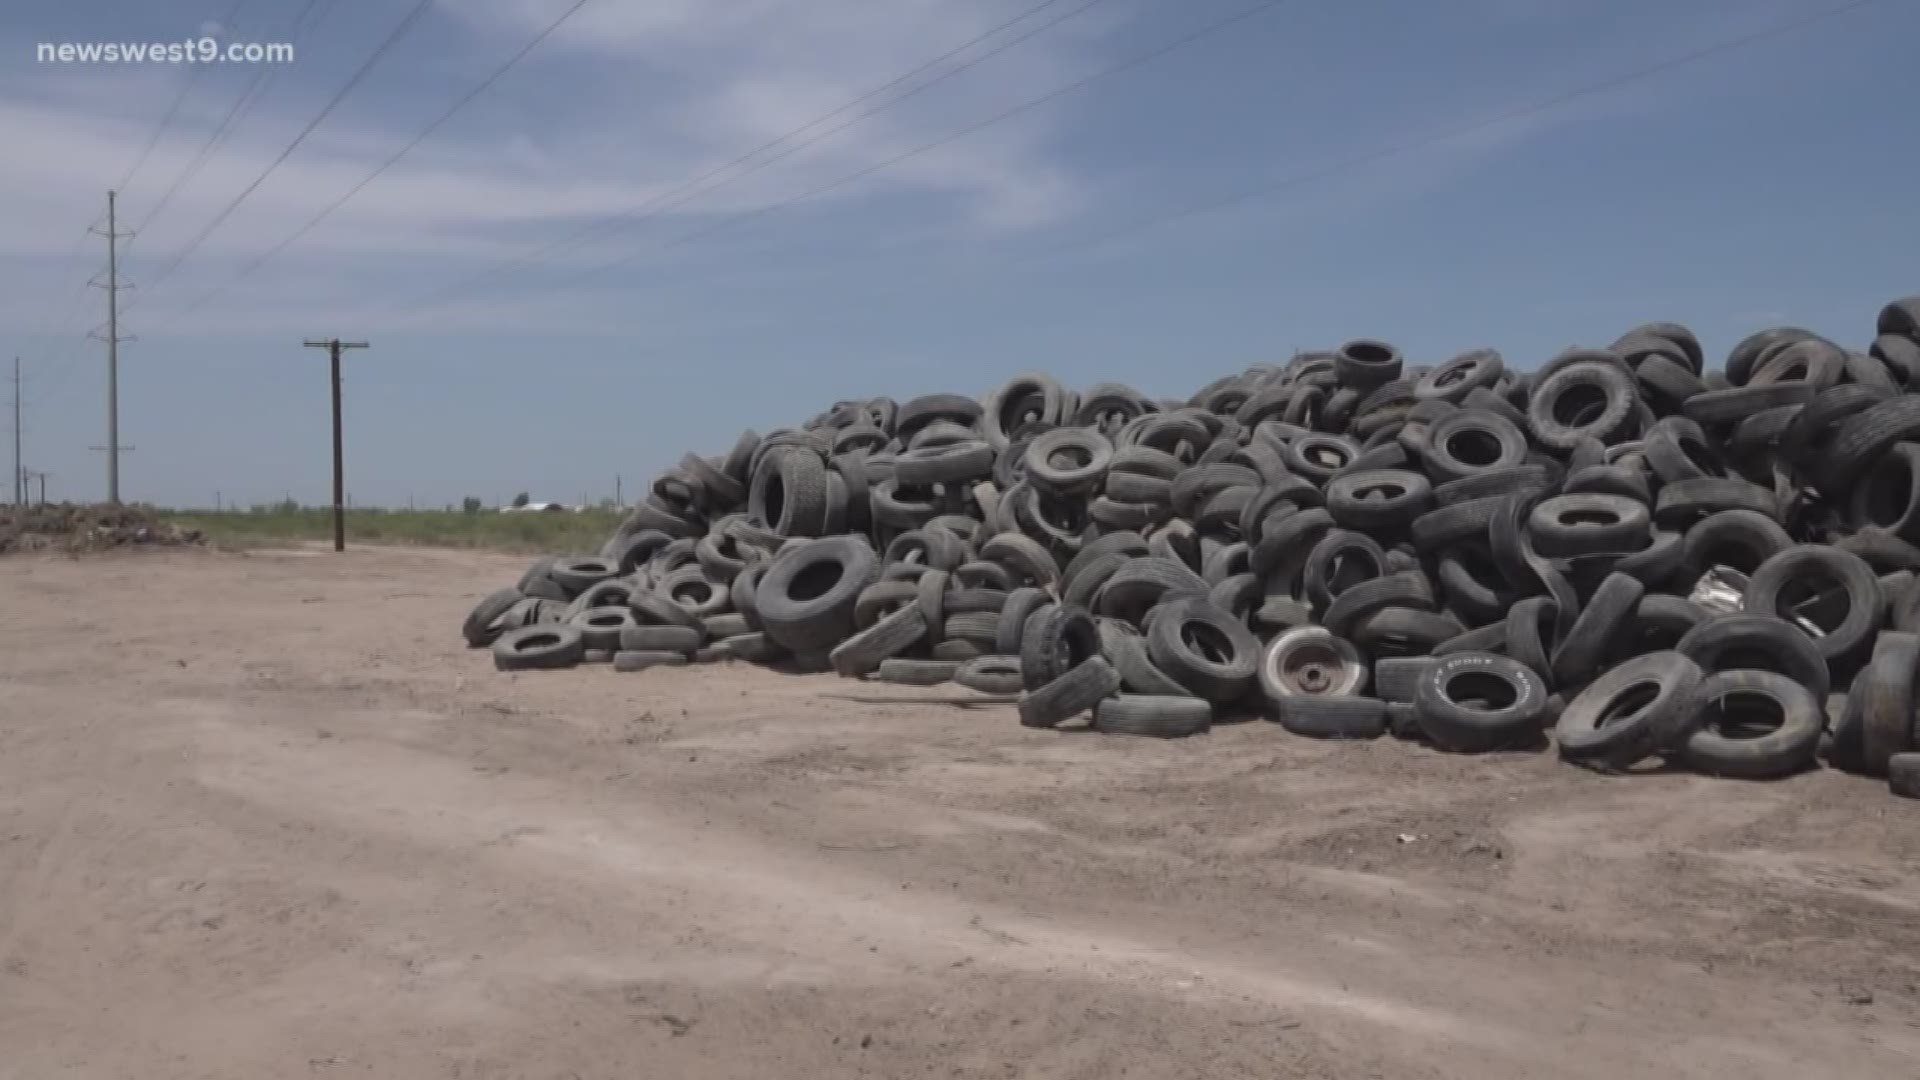 Odessa Crimes Stoppers is counting on someone rolling over on the illegal dumpers that left them there.